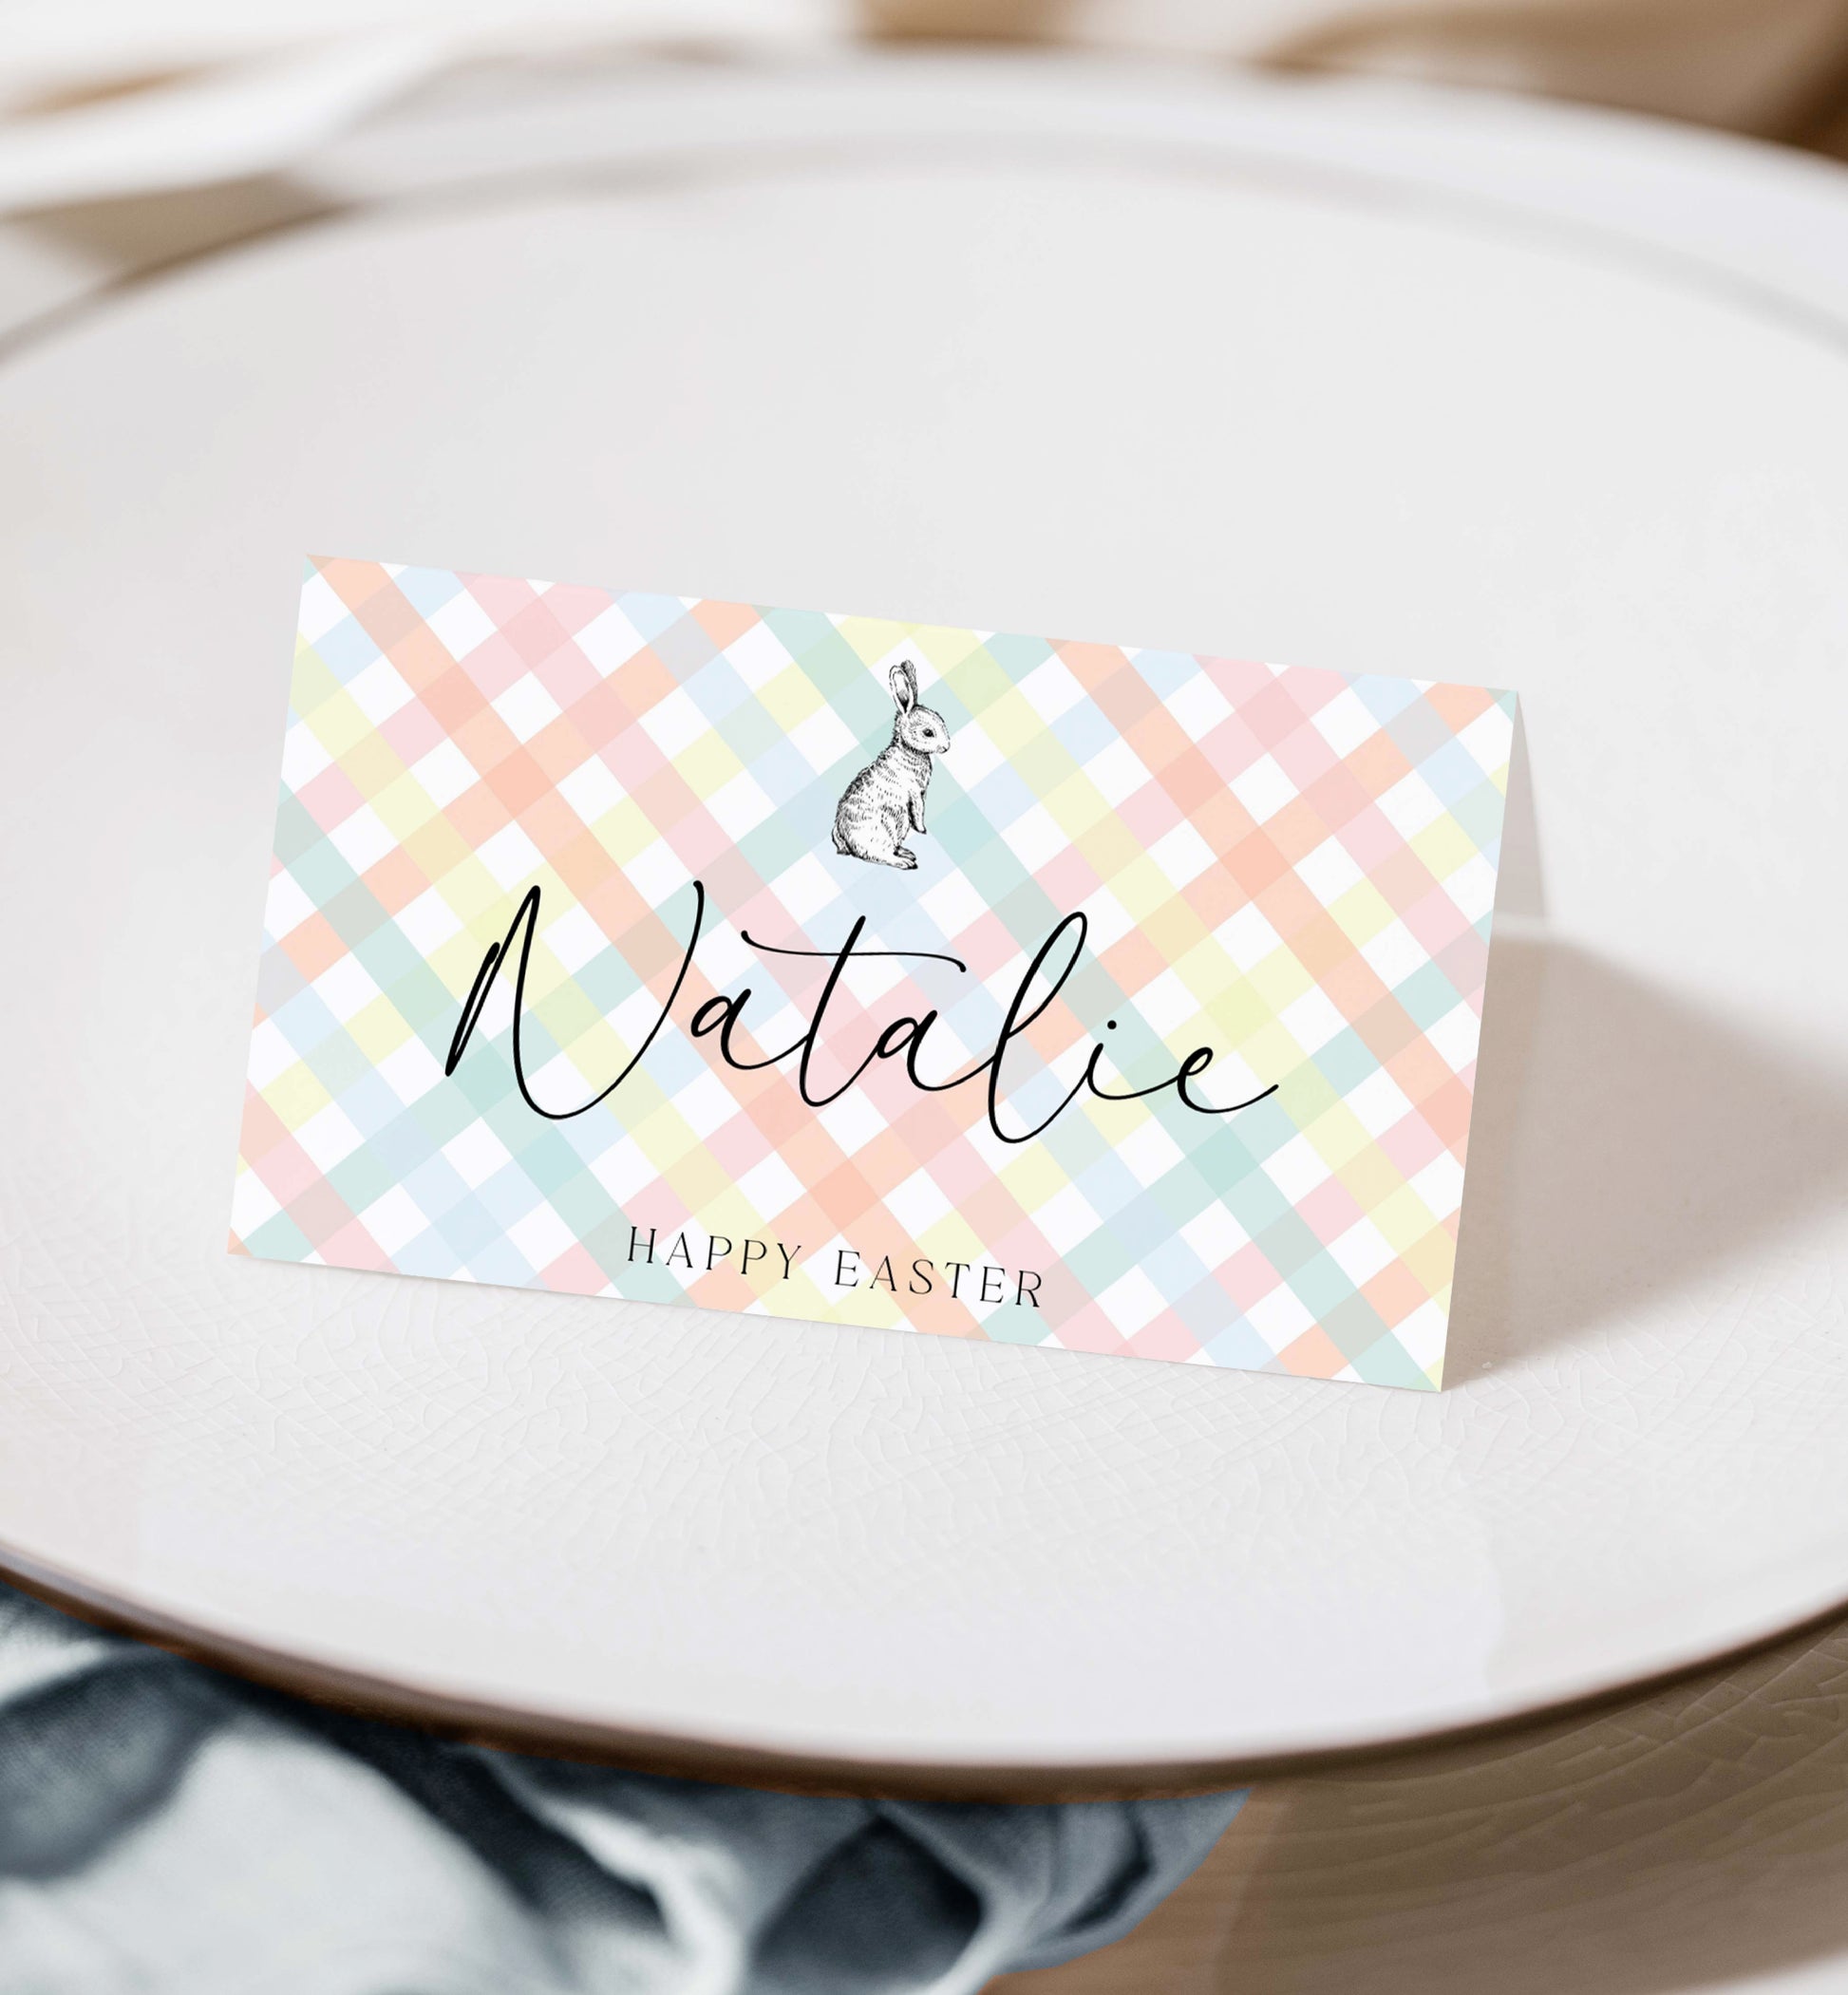 Printable Tent and Flat Style Pace Cards, Multi Gingham, Easter Brunch Place Cards, Printable Place Setting Cards, Easter Lunch Name Cards